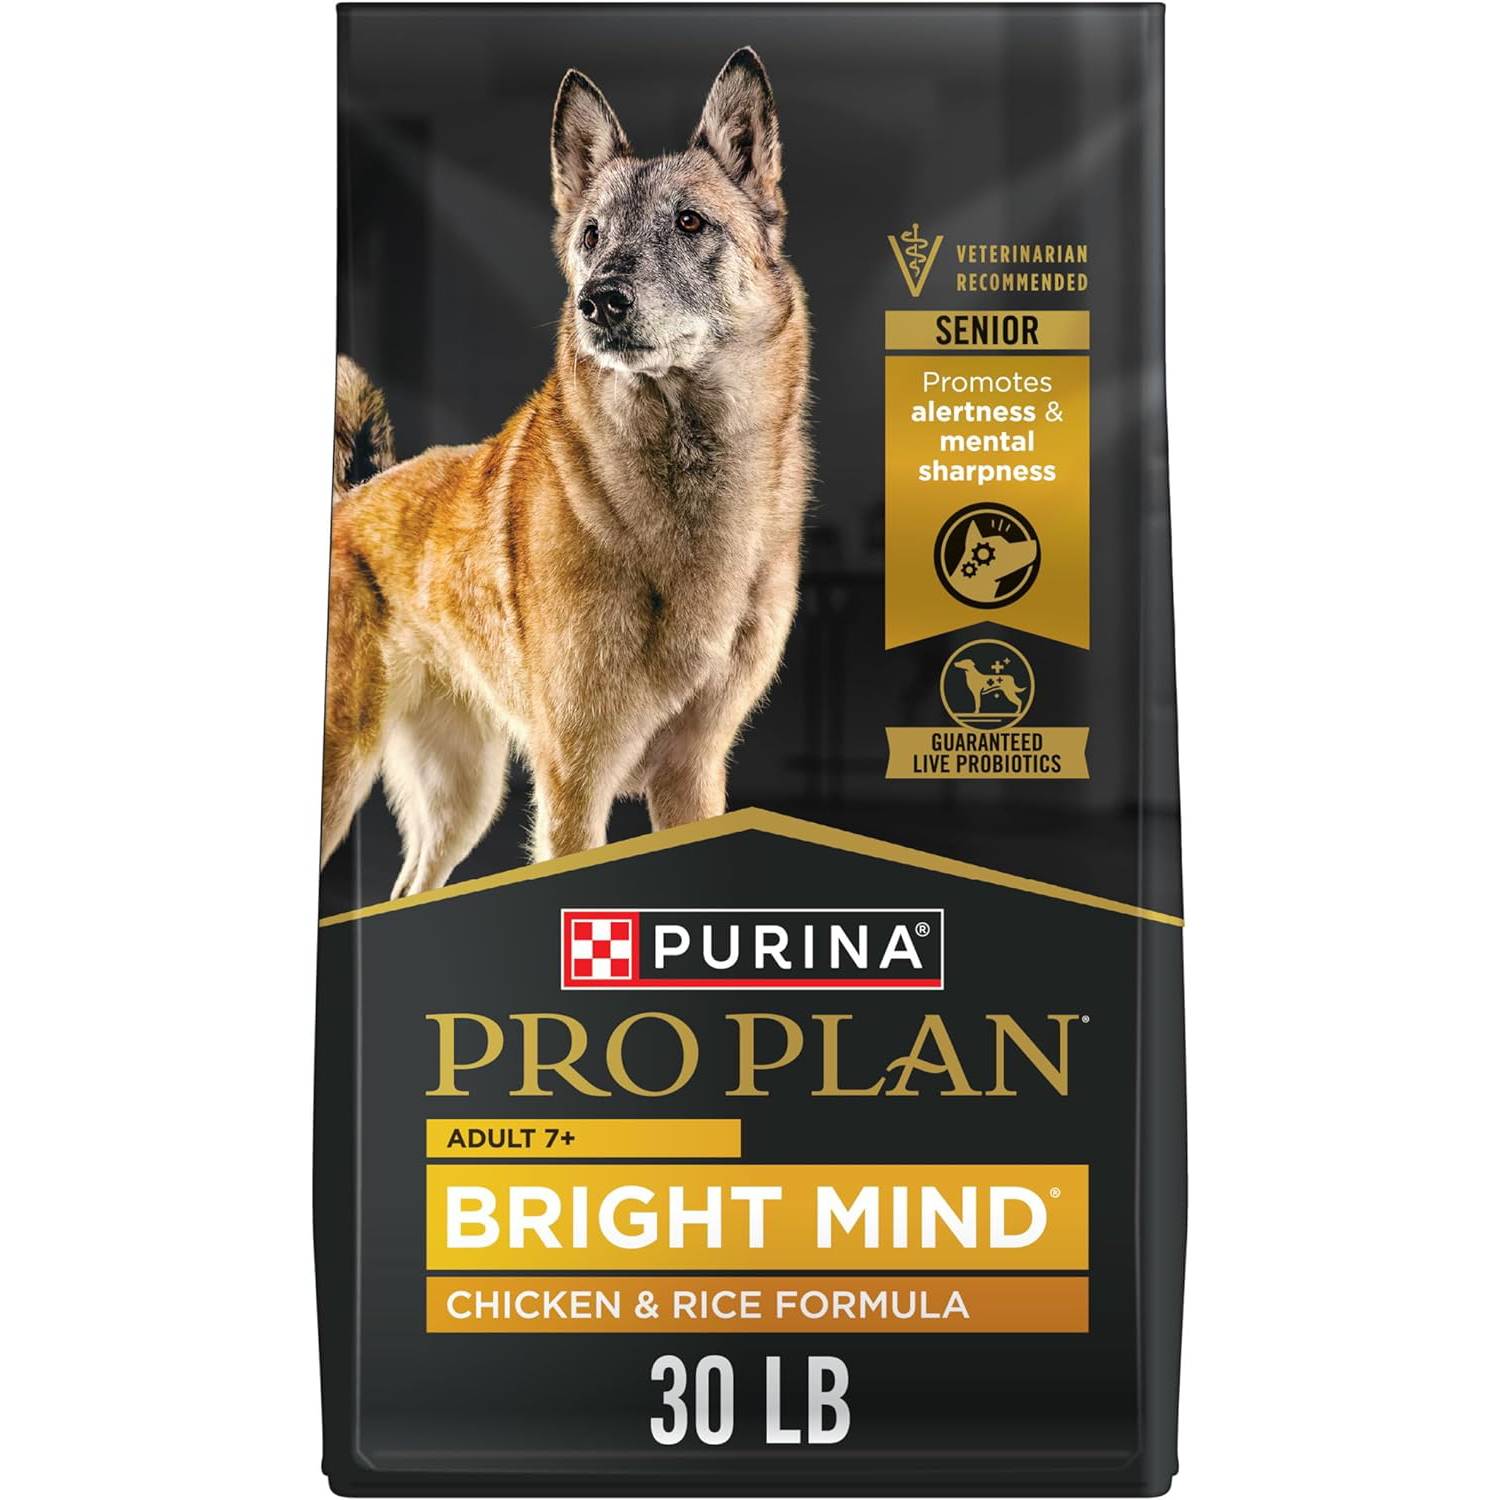 Purina Pro Plan Senior Dog Food With Probiotics for Dogs